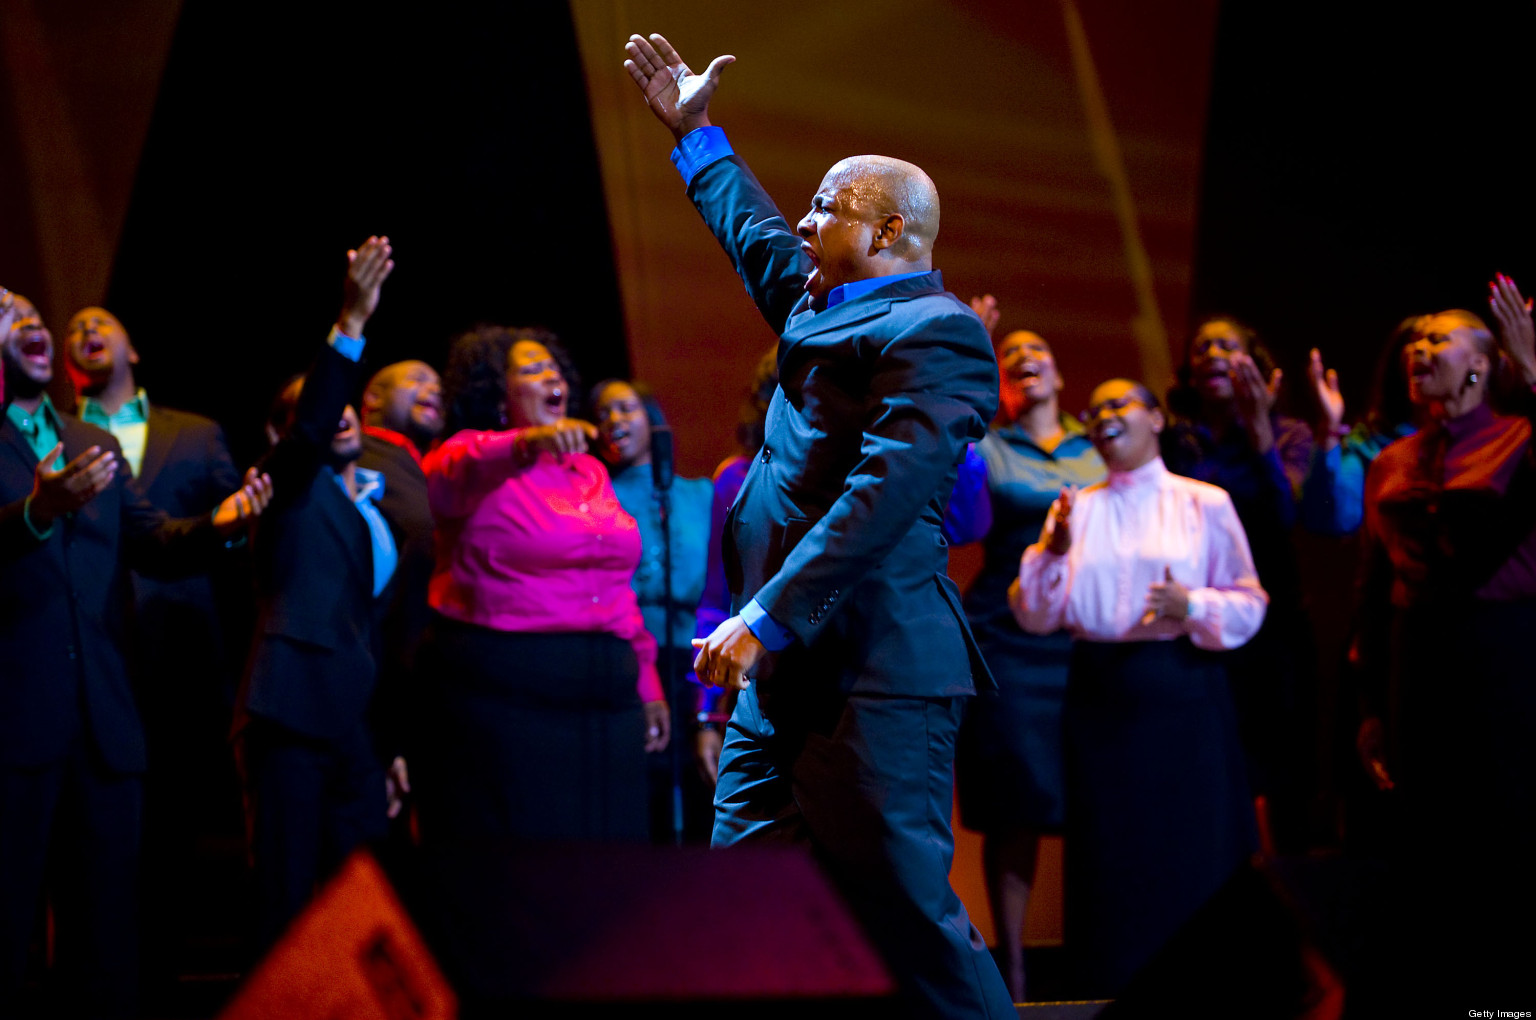 PHILADELPHIA, PA - SEPTEMBER 26: The Anointed Voices of Ford Memorial Temple Choir perform at the Verizon Wireless 'How Sweet the Sound' National Gospel Competition at the Wachovia Center on September 26, 2009 in Philadelphia, Pennsylvania. The Choir was the winner in the Large Choir category. (Photo by Jeff Fusco/Getty Images for Verizon Wireless)